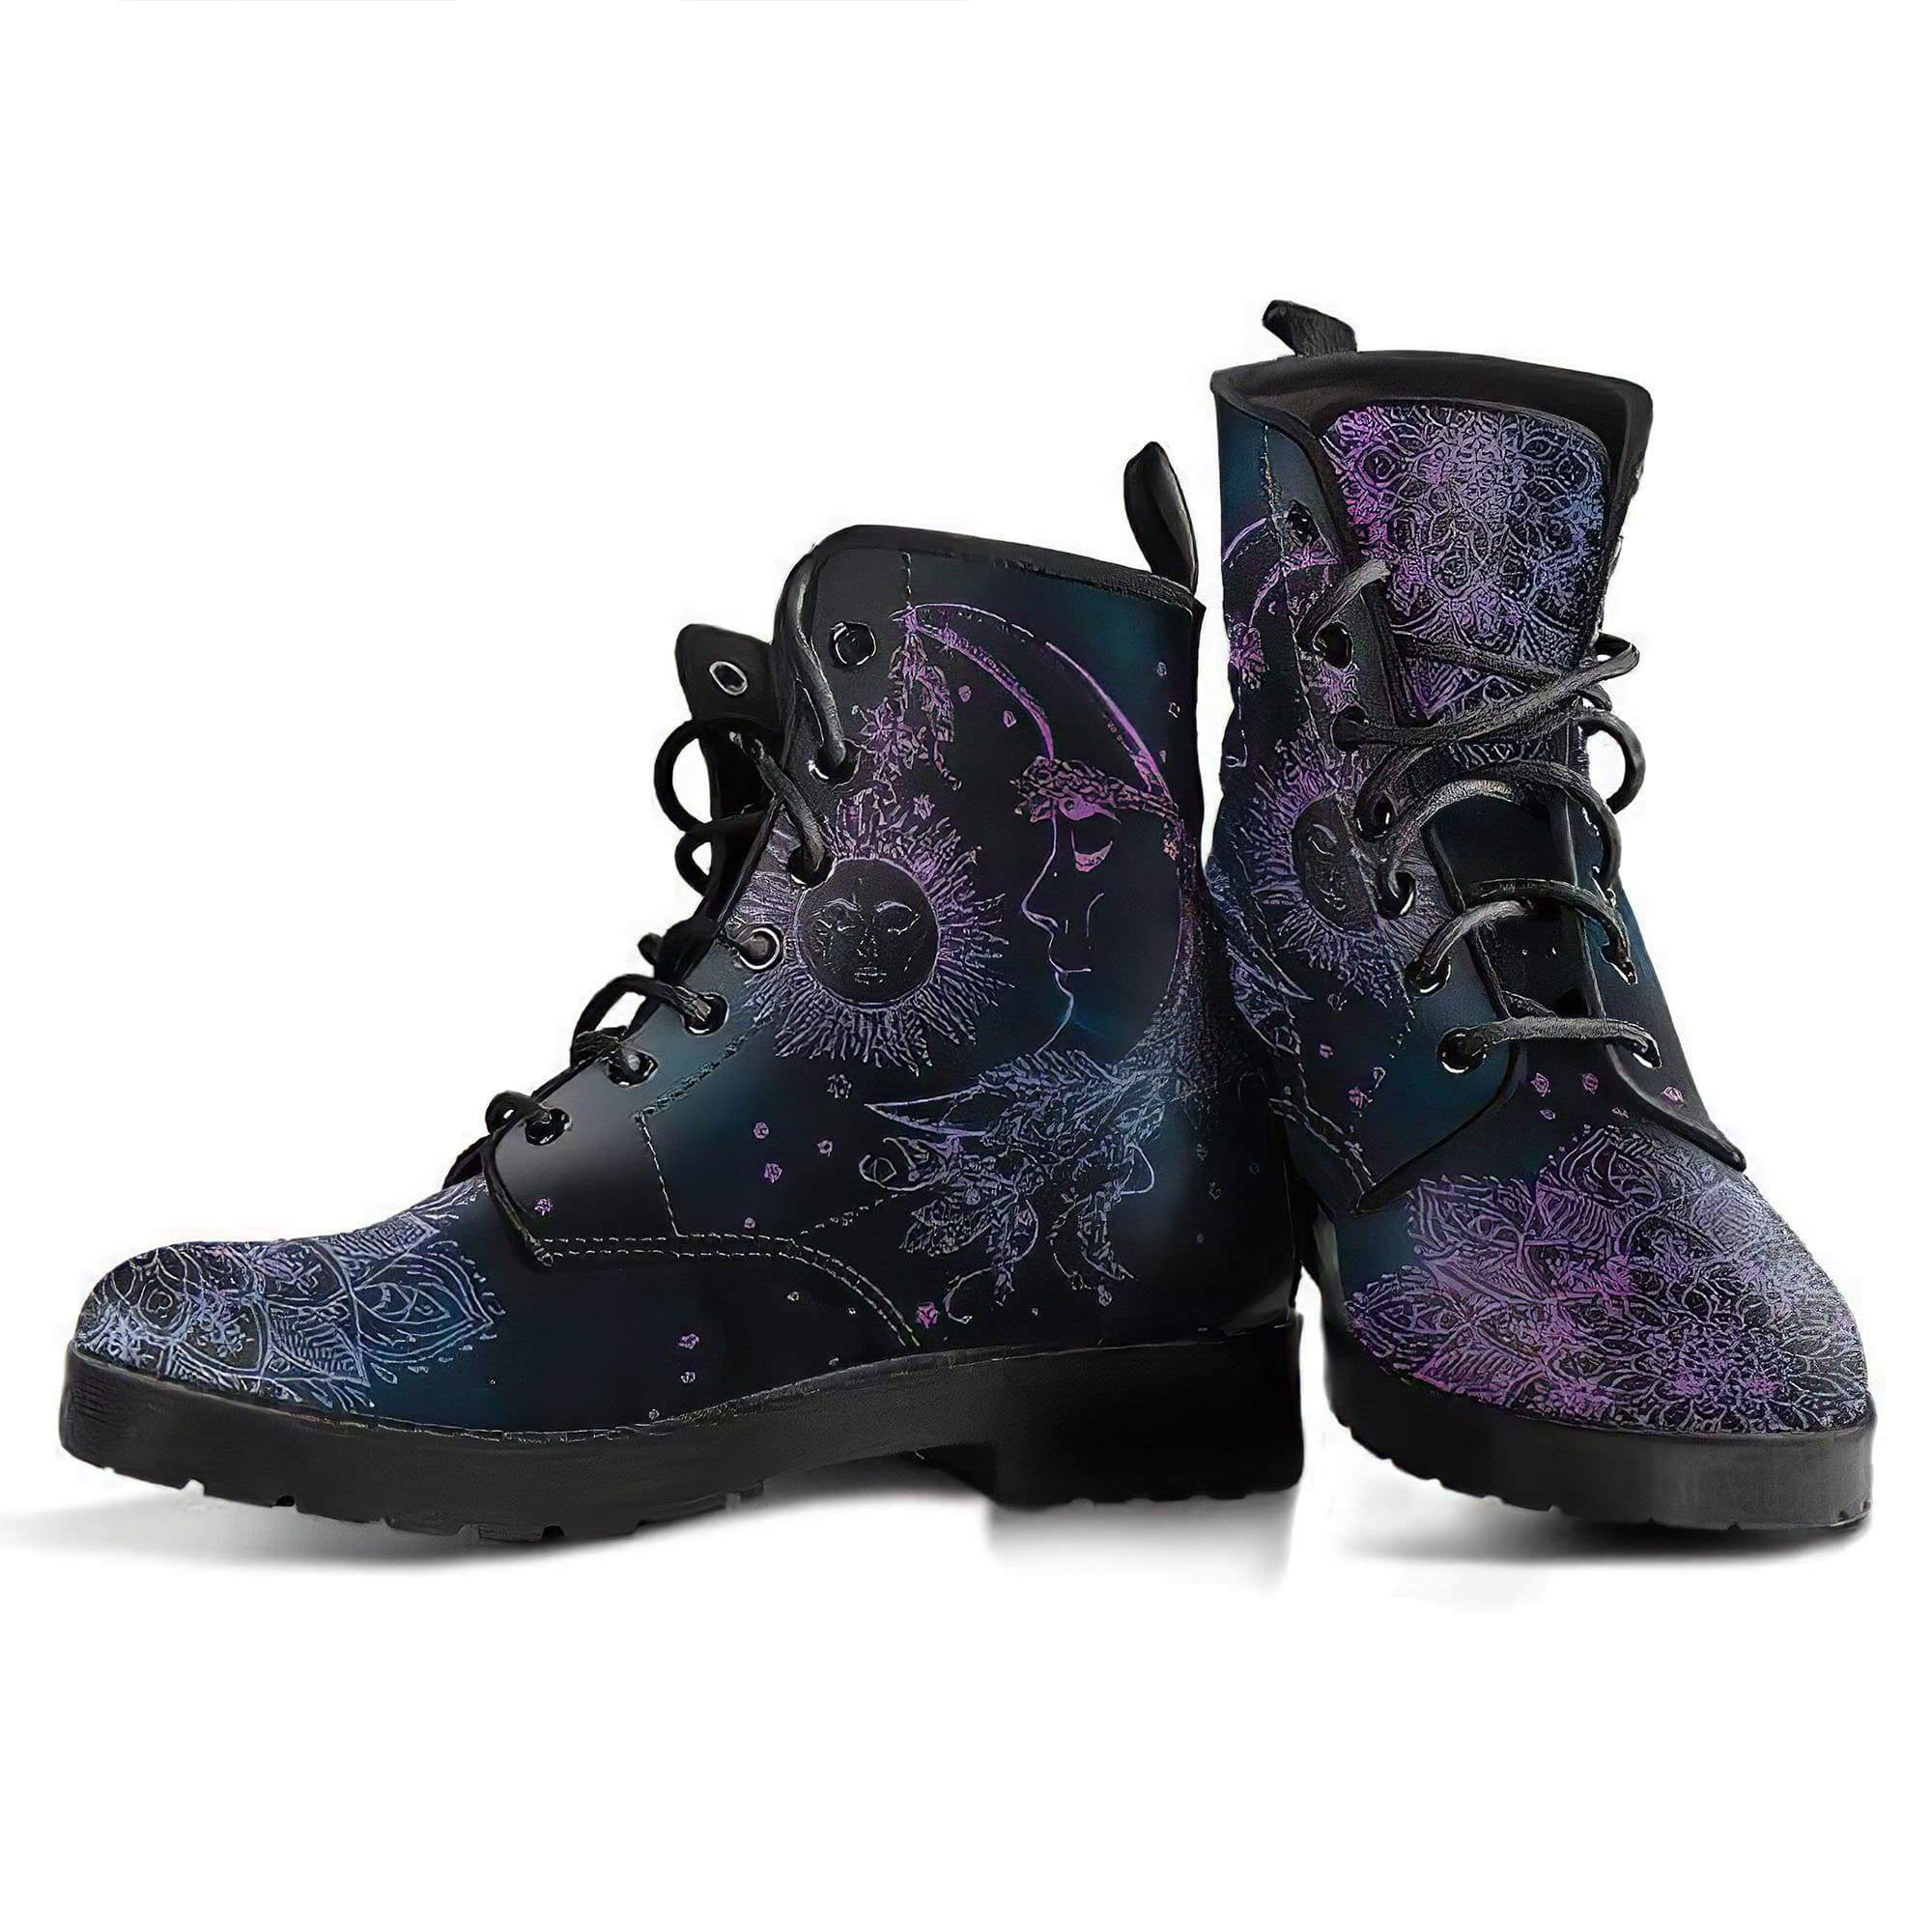 purple-sun-moon-handcrafted-boots-women-s-leather-boots-12051940540477.jpg